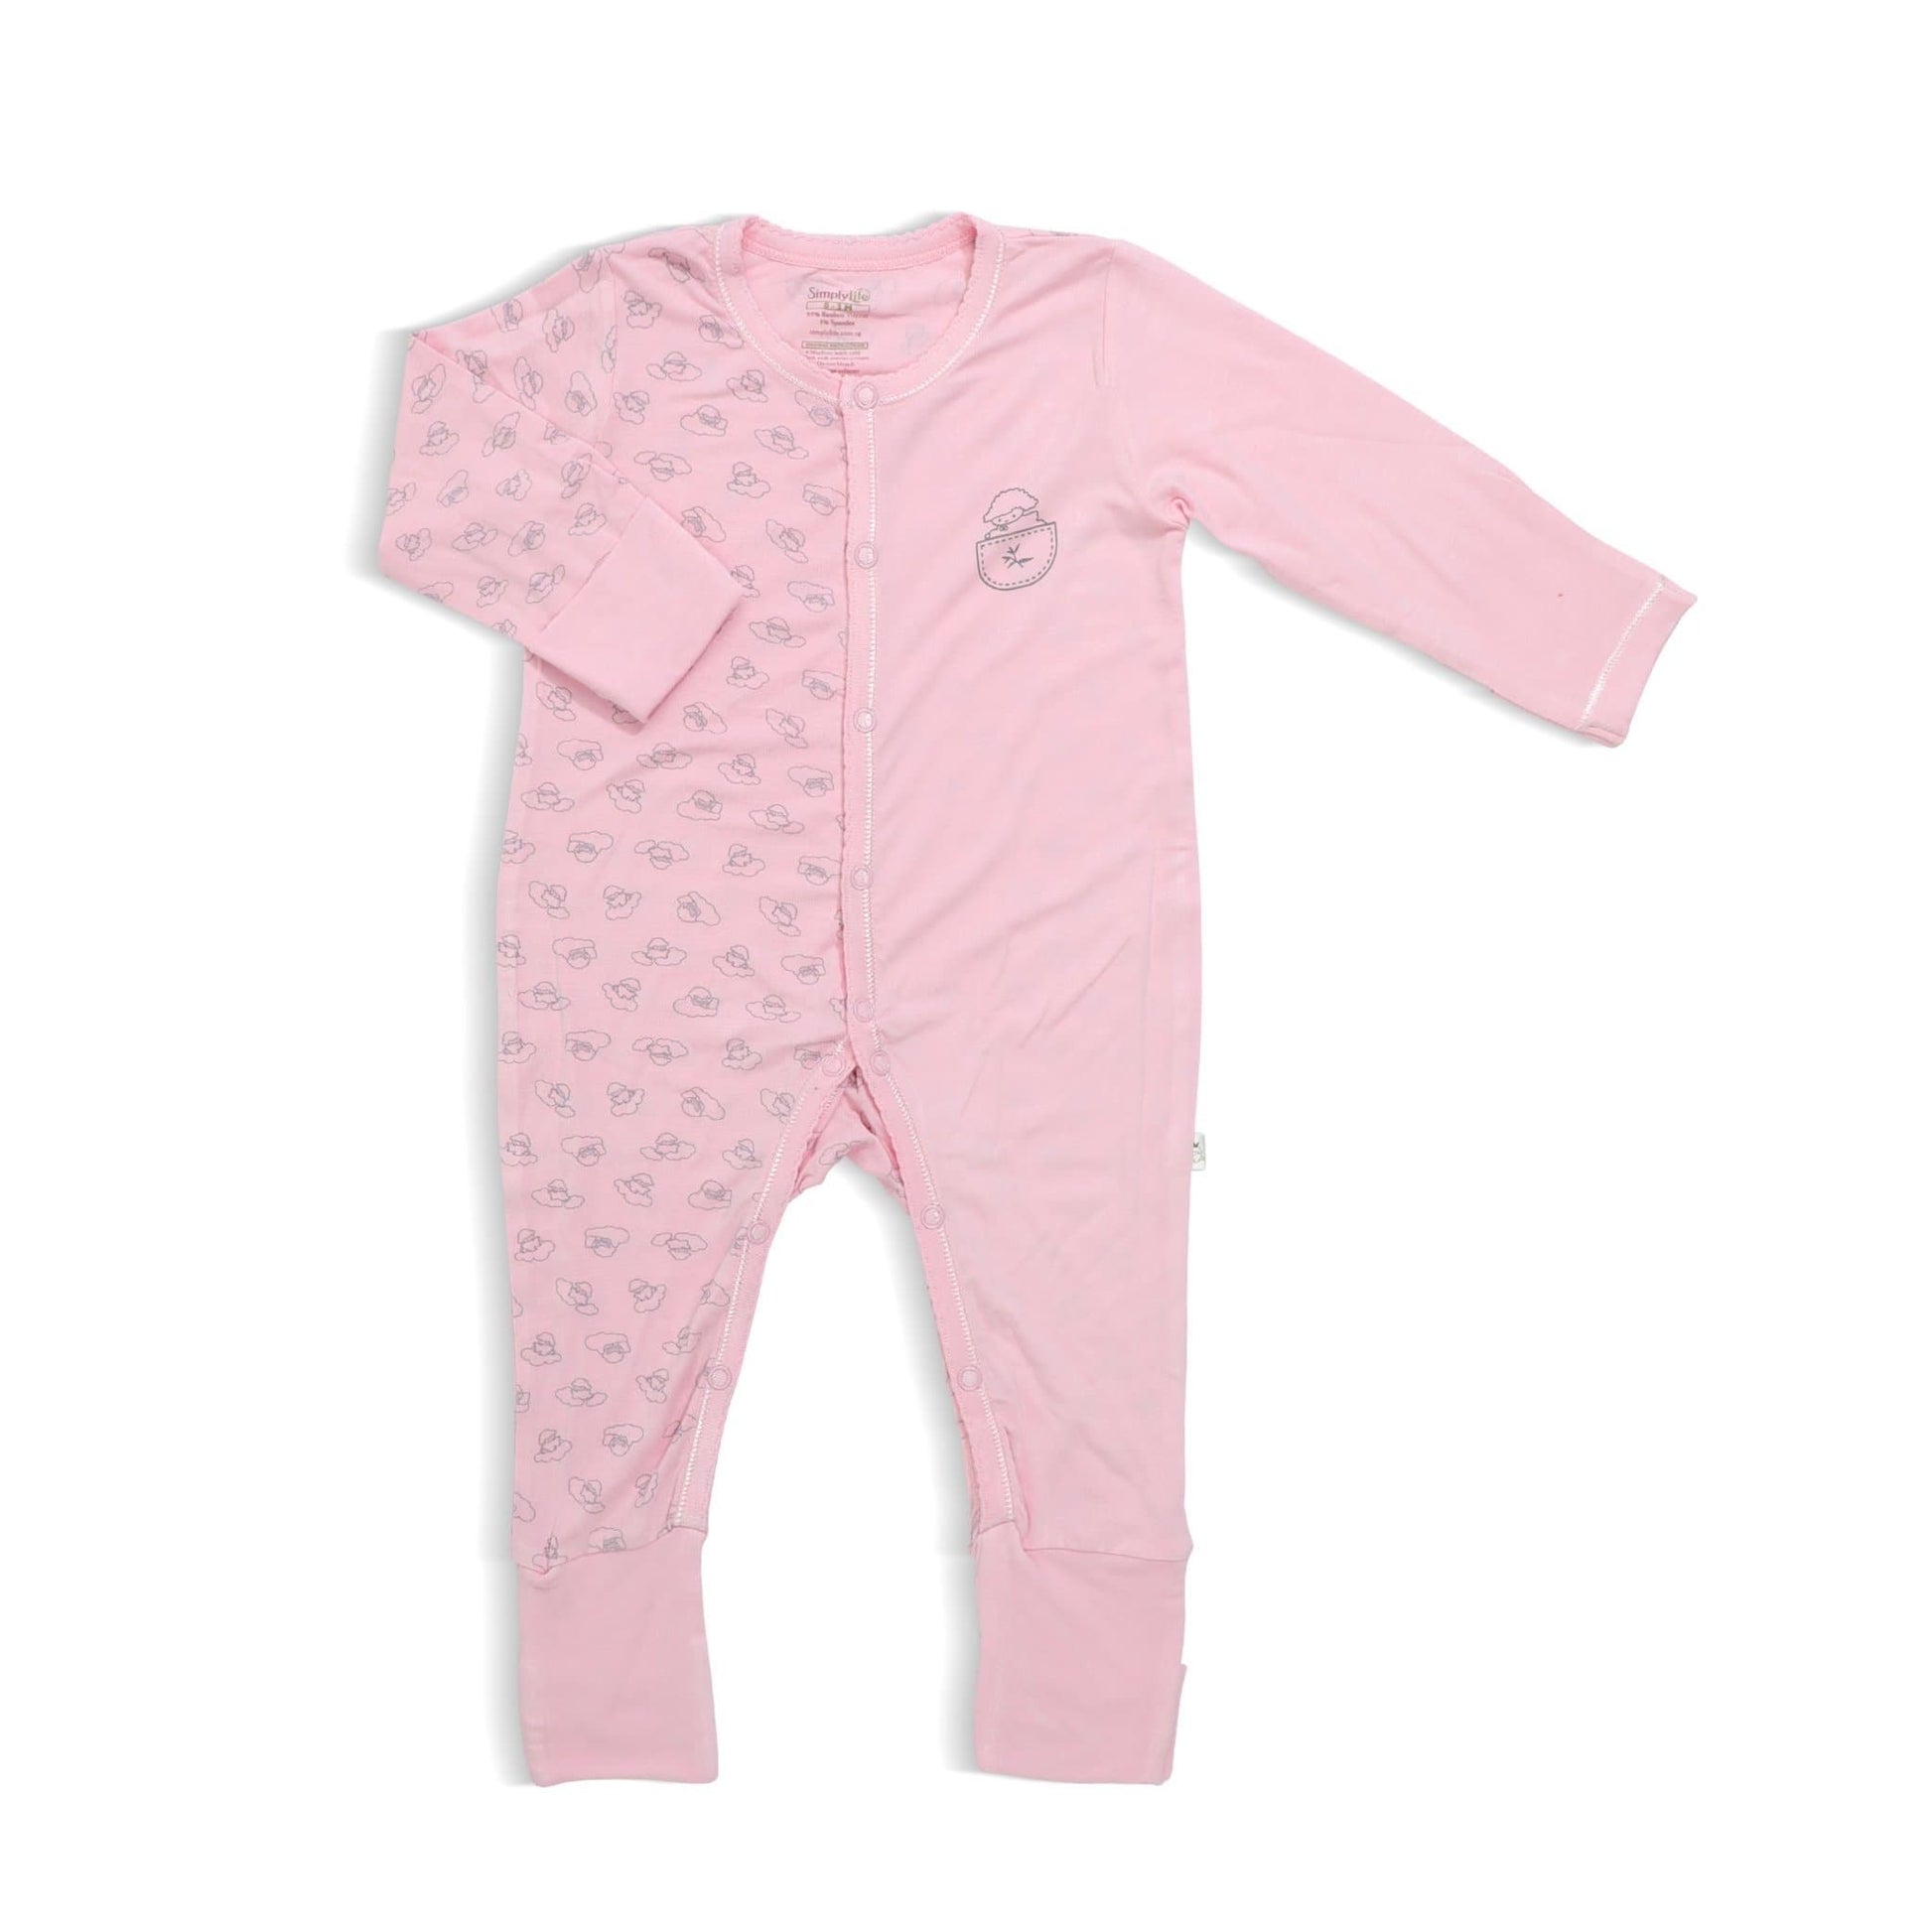 Adorable Lamb - Long-sleeved Button Sleepsuit with Folded Mittens & Footie by simplylifebaby